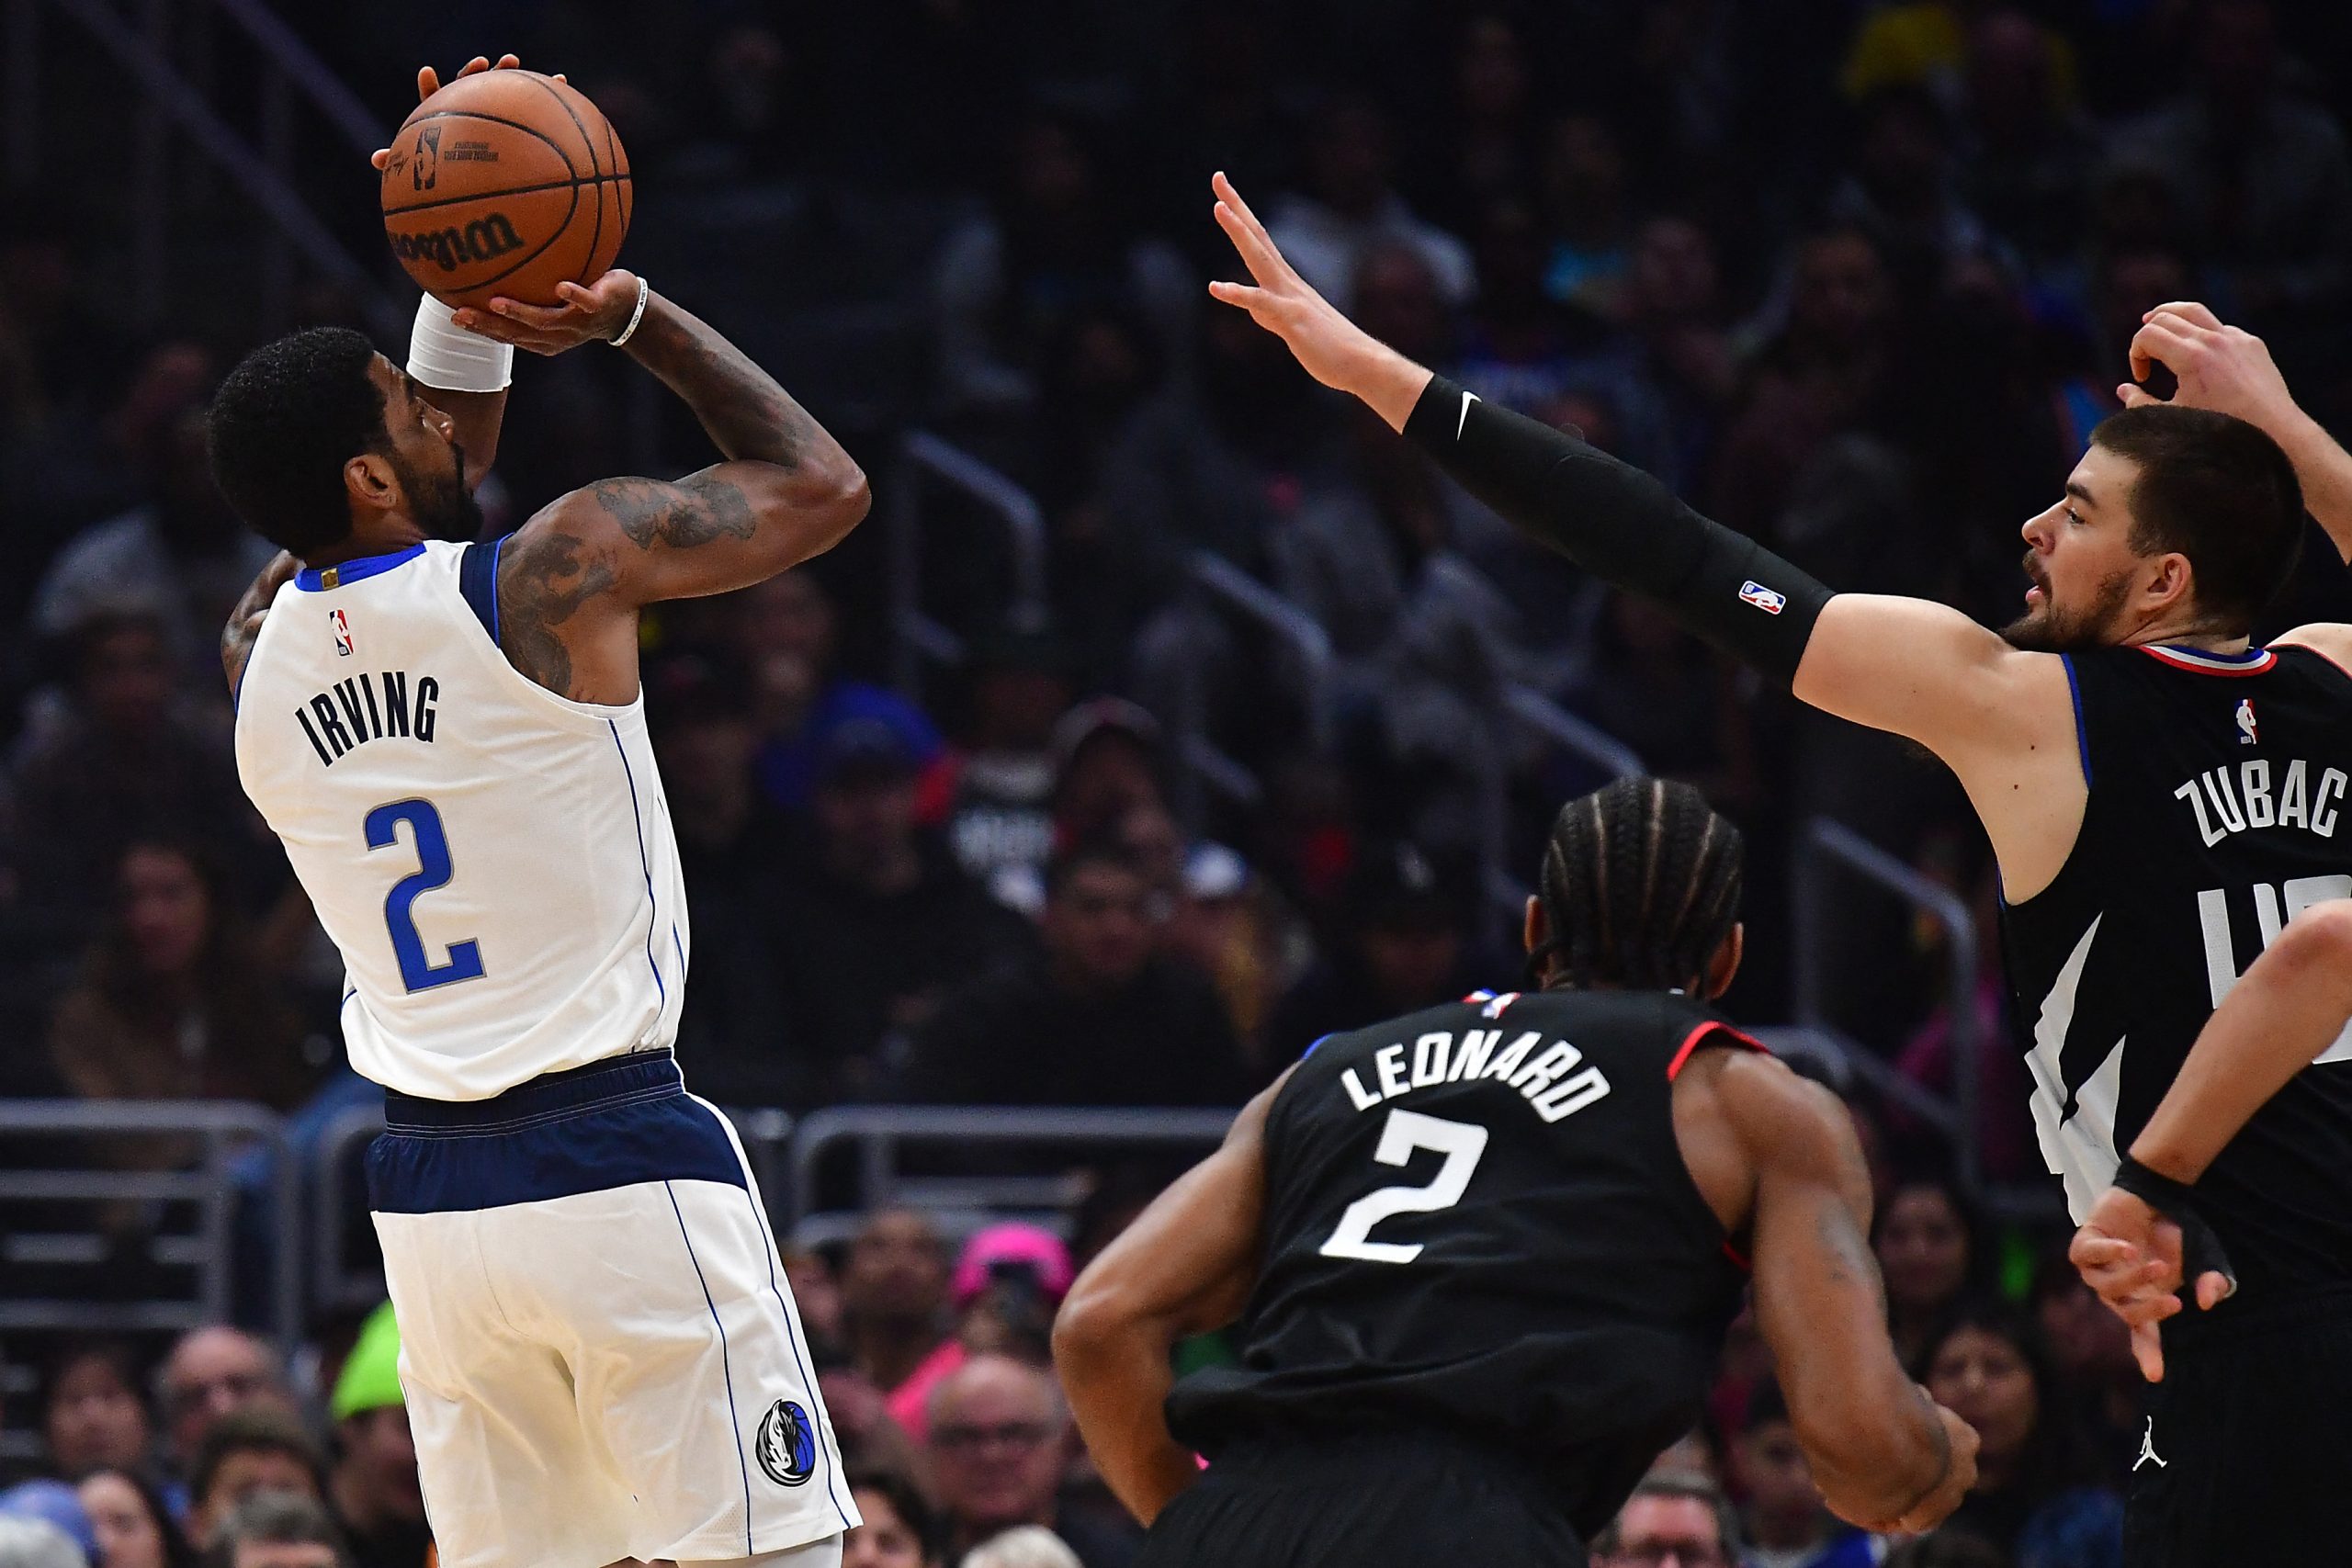 Feb 8, 2023; Los Angeles, California, USA; Dallas Mavericks guard Kyrie Irving (2) shoots against Los Angeles Clippers center Ivica Zubac (40) during the first half at Crypto.com Arena. Mandatory Credit: Gary A. Vasquez-USA TODAY Sports Photo: Gary A. Vasquez/REUTERS